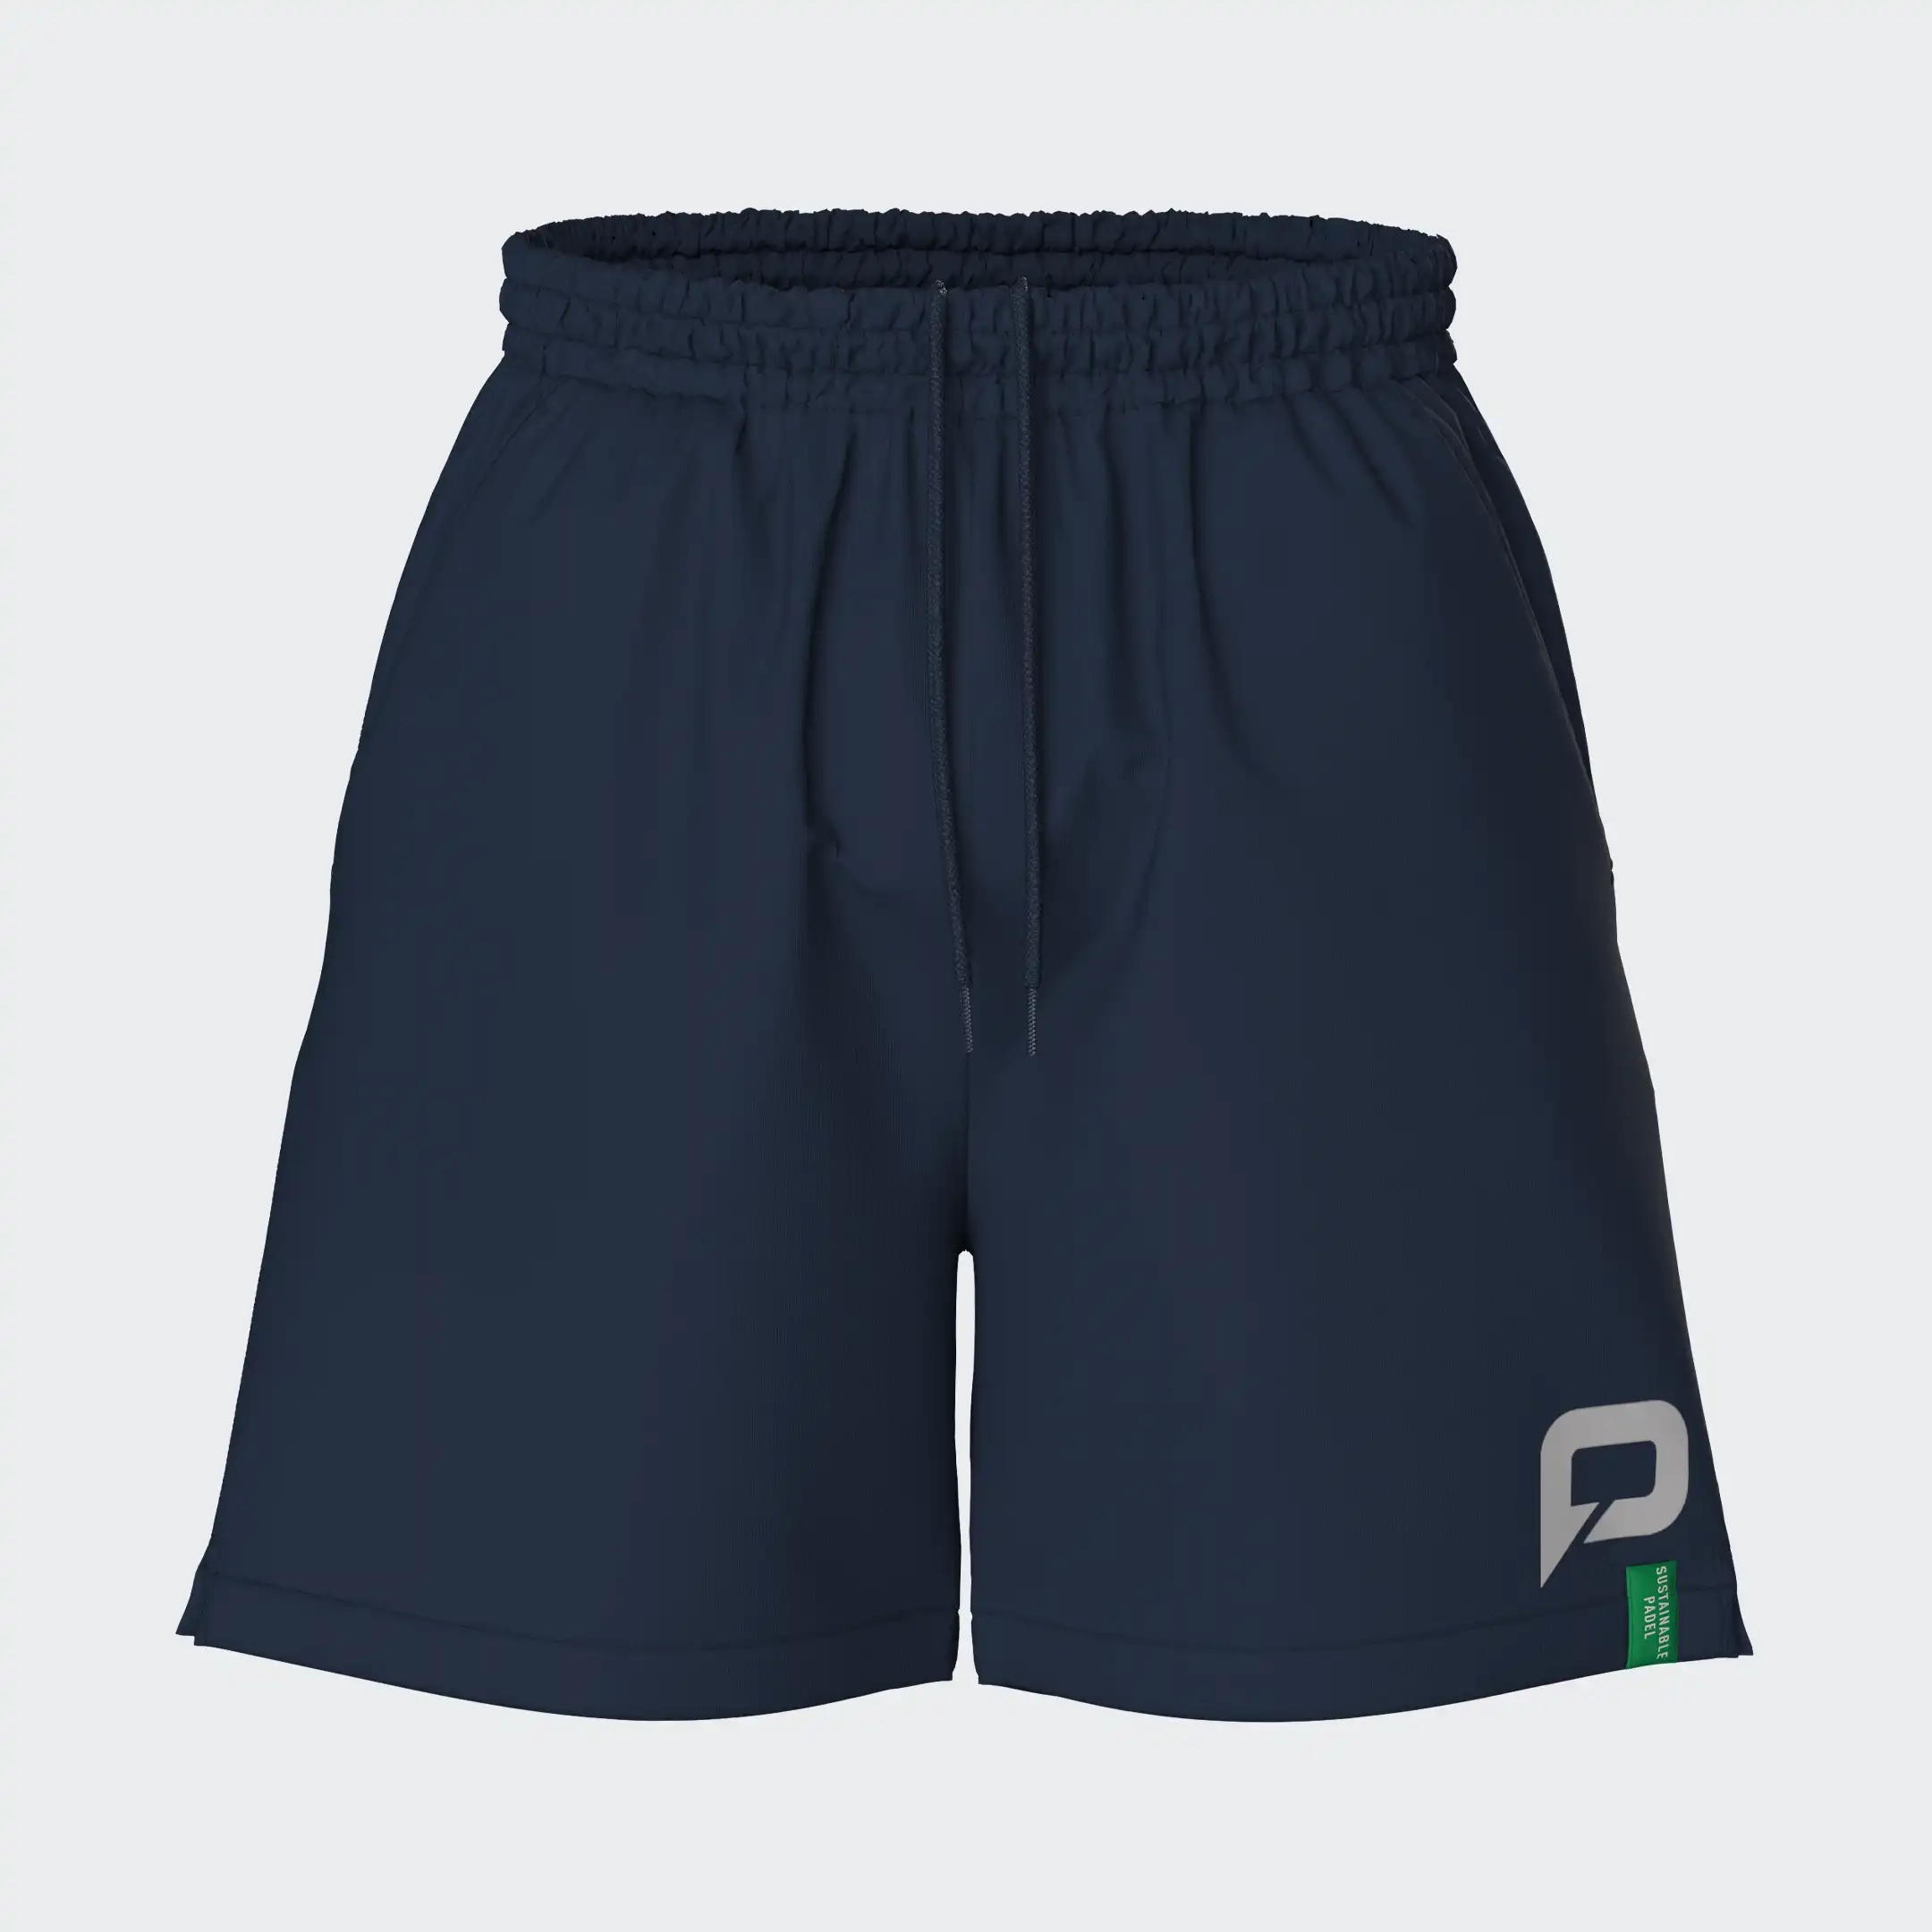 Pallap Competition Shorts navy blue/cool grey